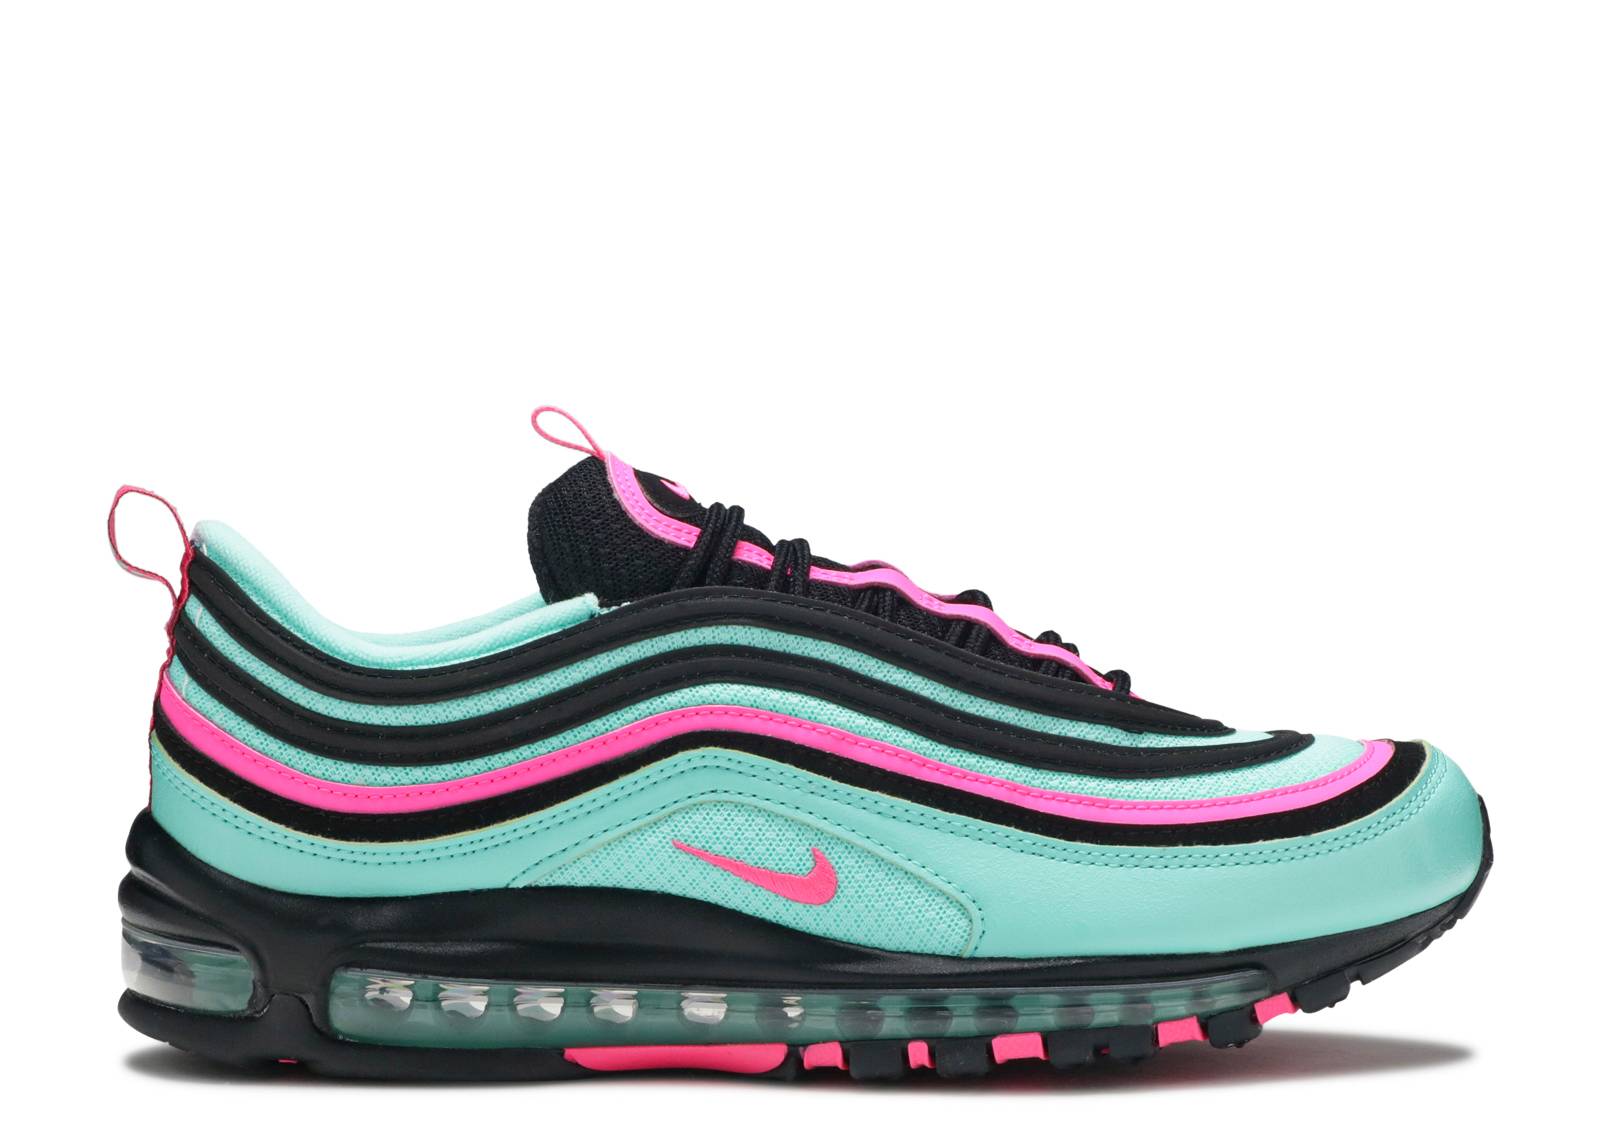 Air Max 97 'Hyper Turquoise'